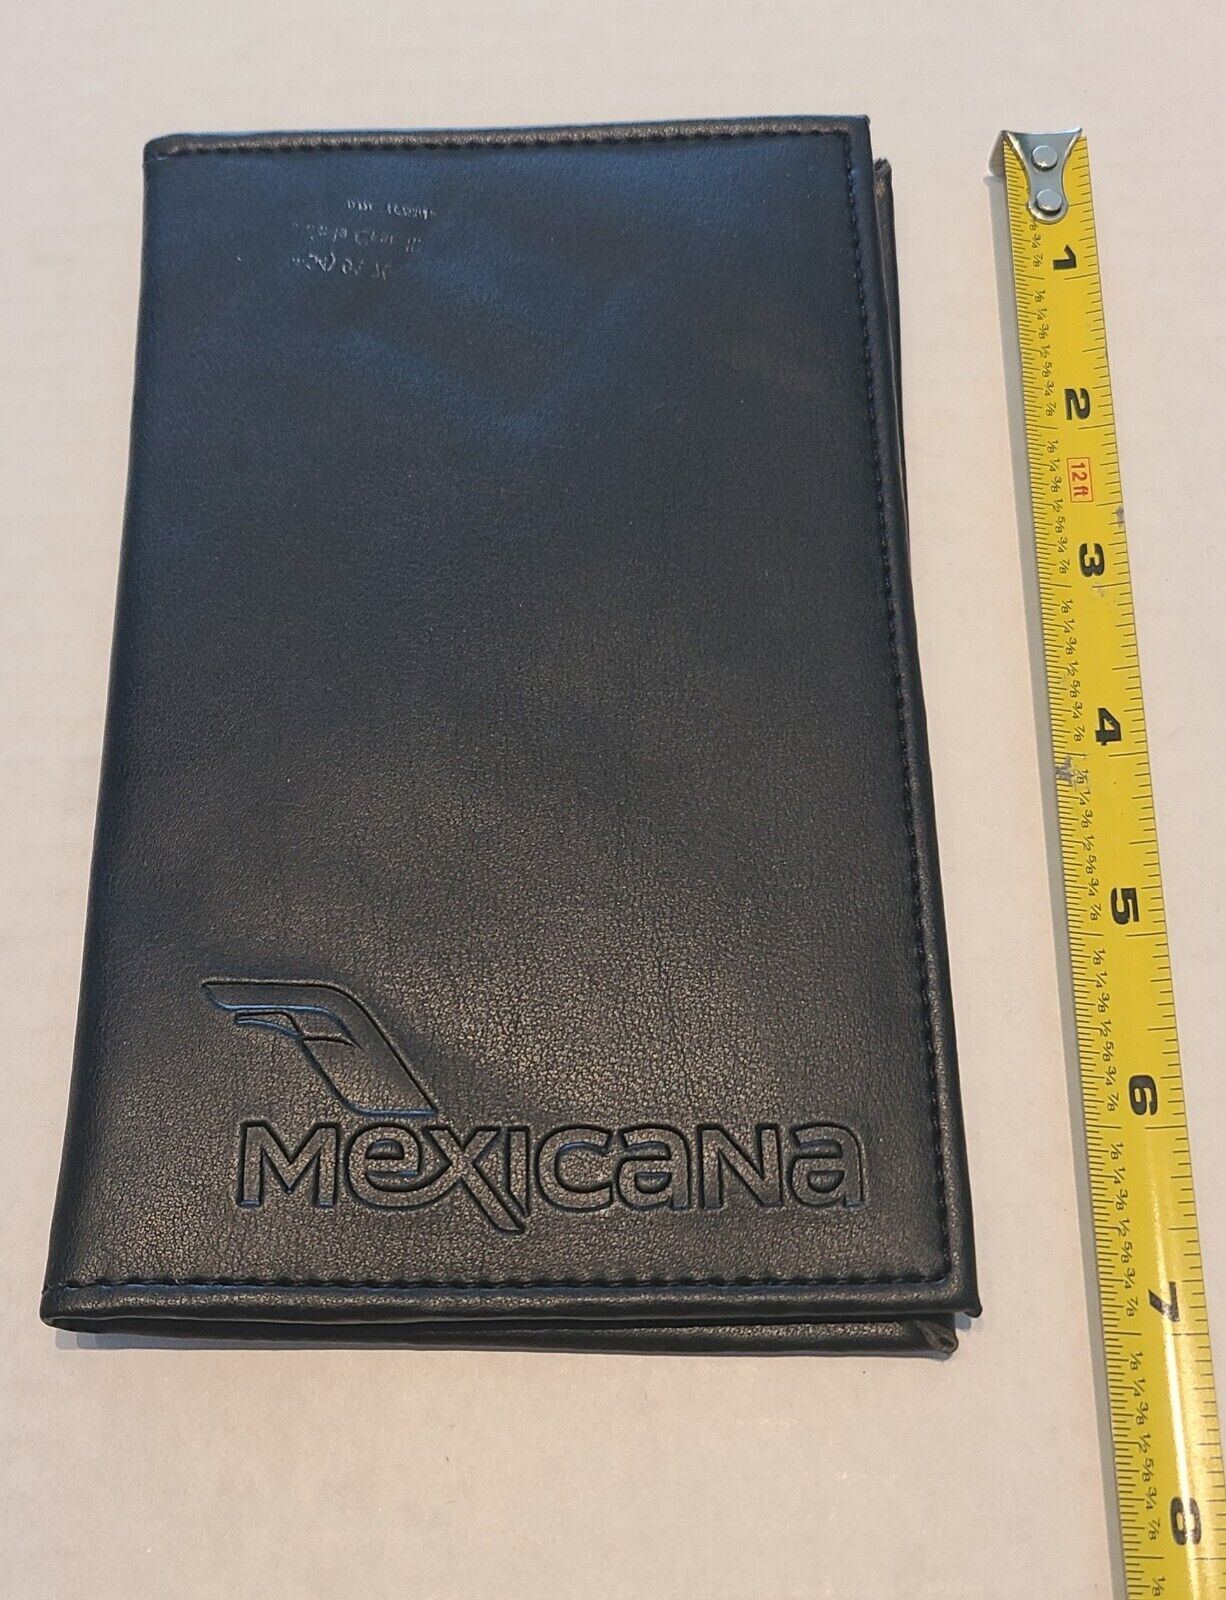 Vintage- Mexicana Airlines- Travel wallet- Black leather